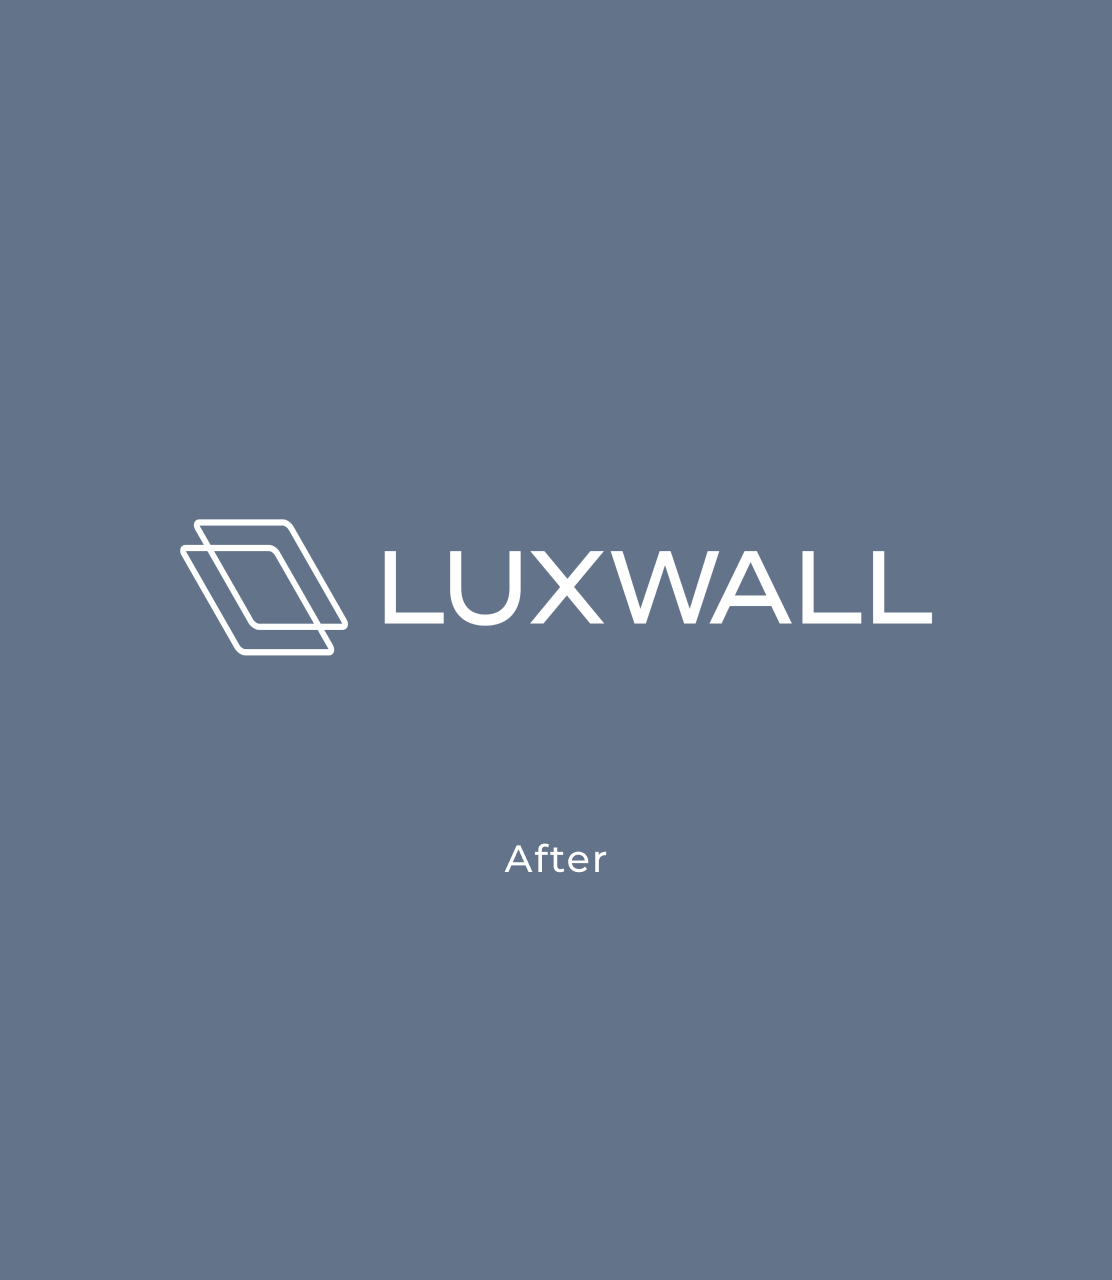 Luxwall’s previous logo and their new logo created by the JRT agency